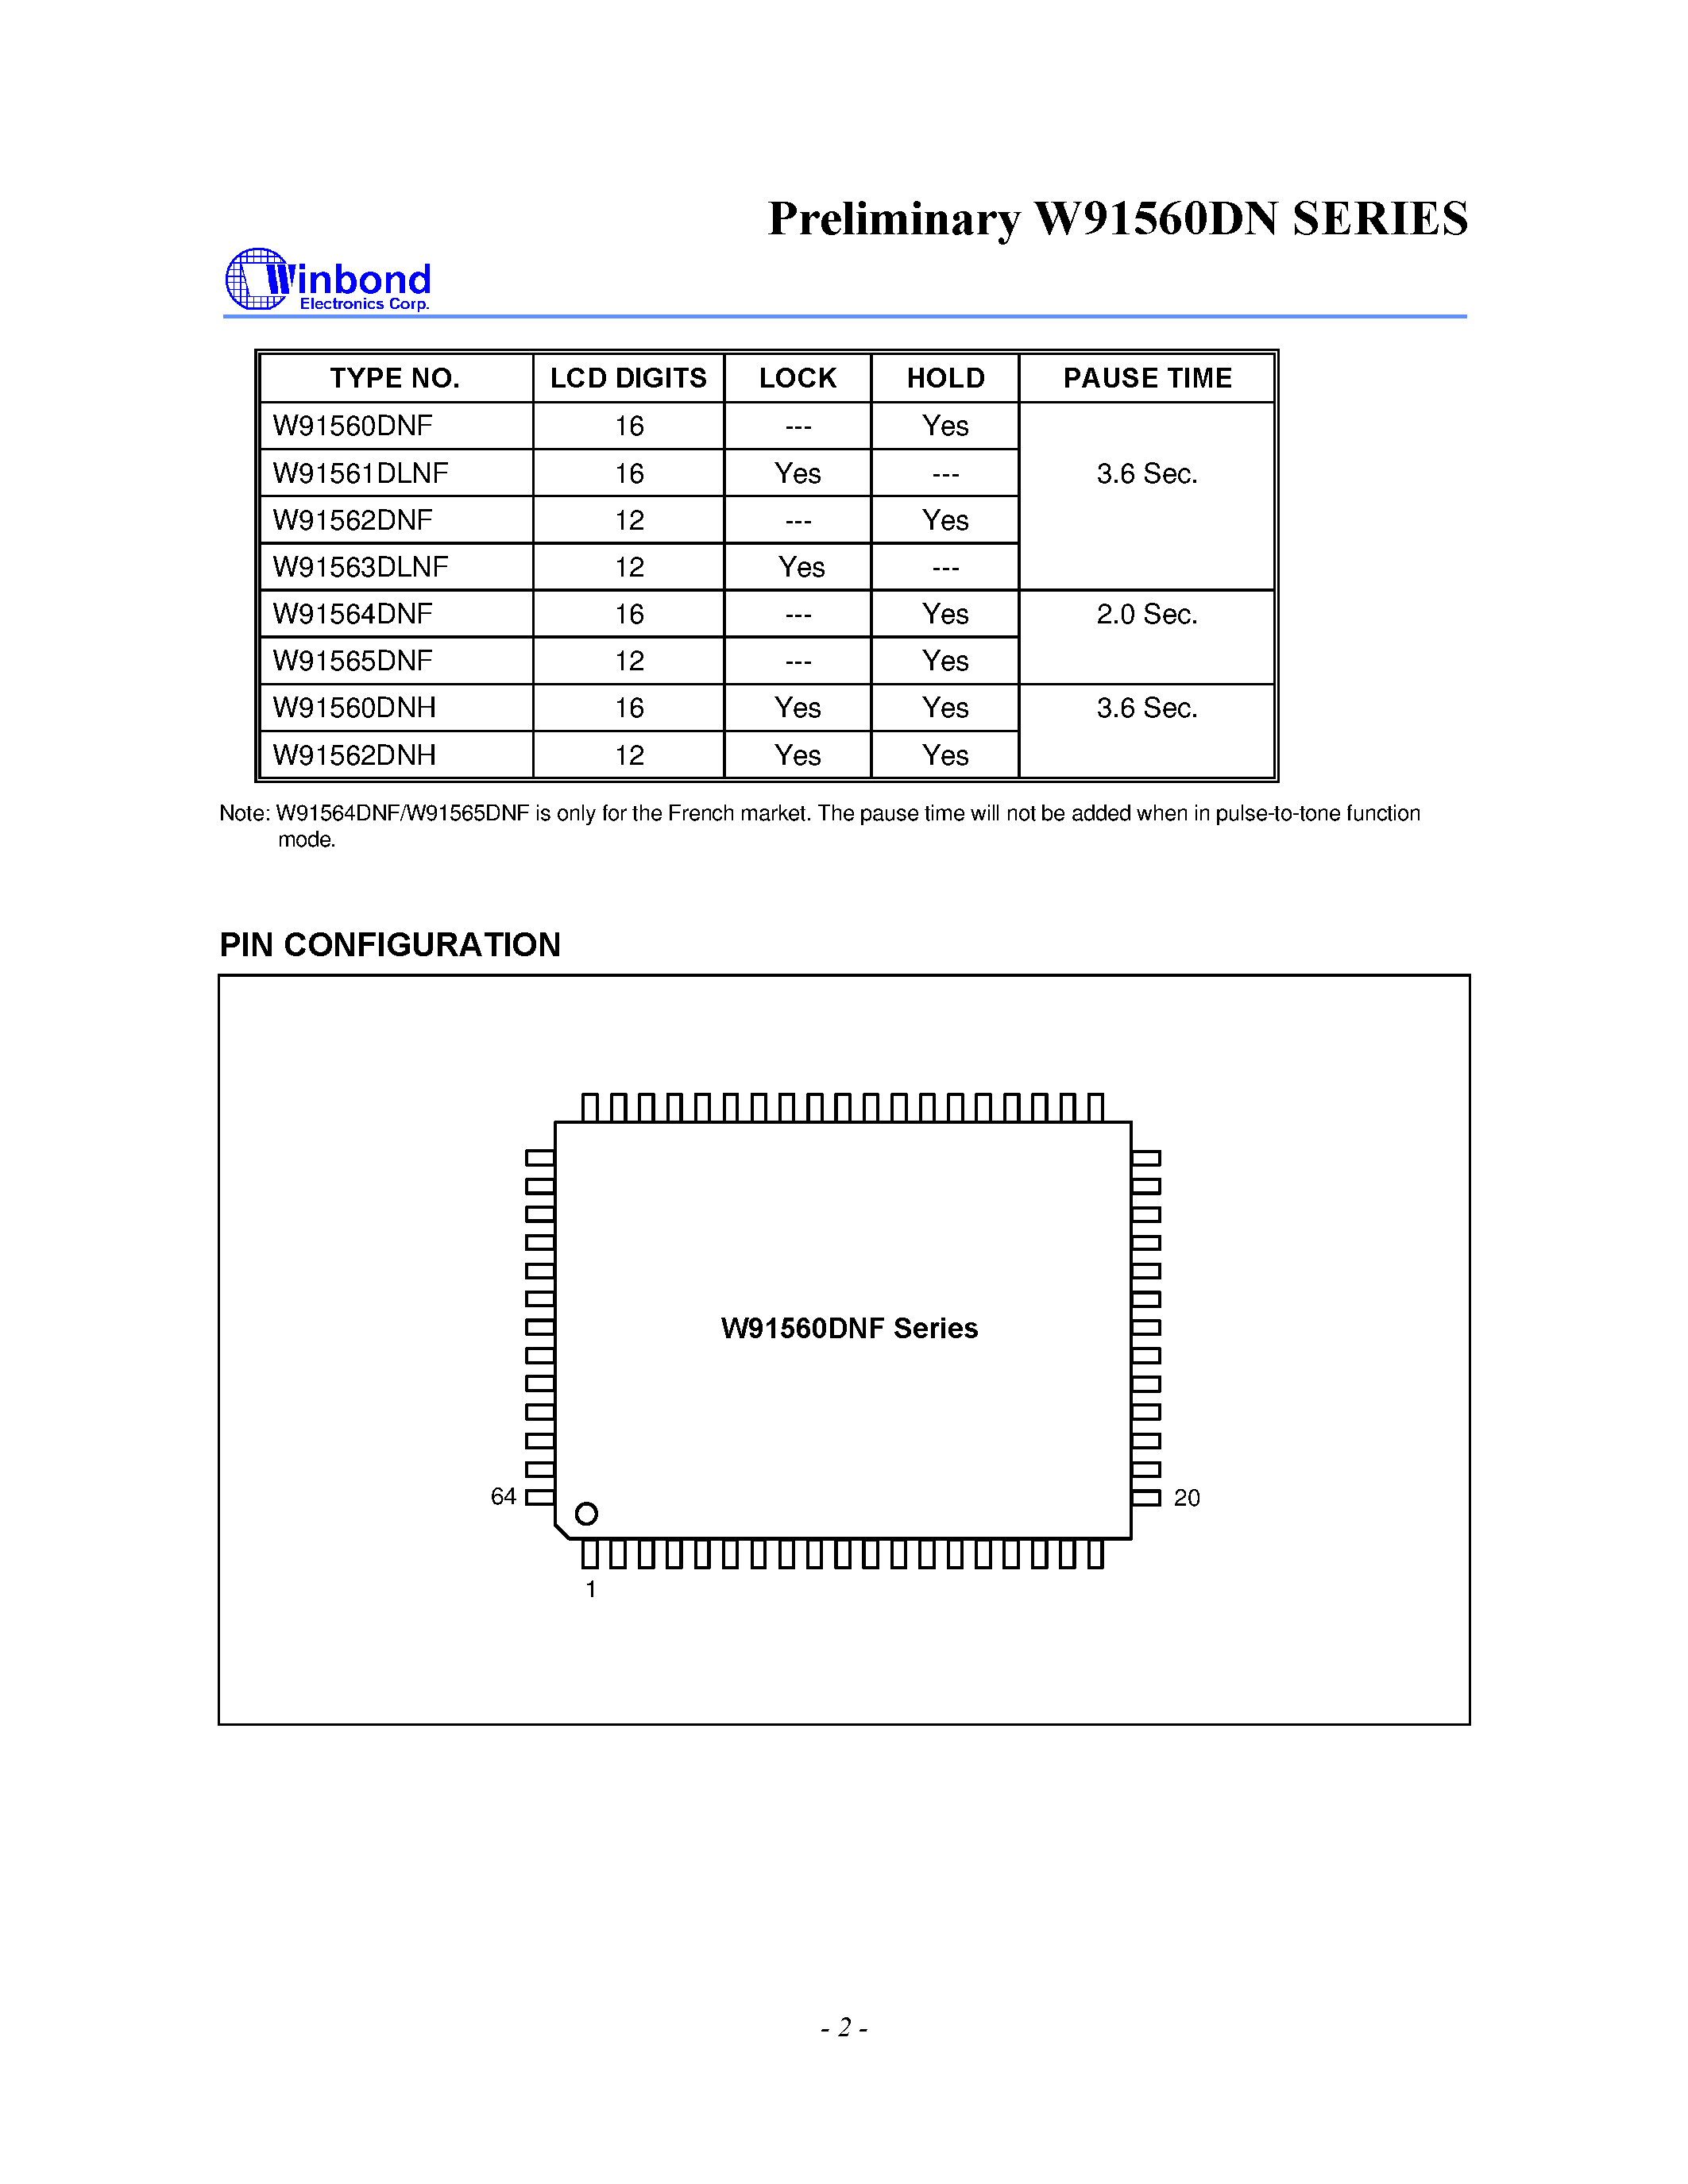 Datasheet W91561ALN - 3-MEMORY TONE/PULSE DIALER WITH SAVE/ KEYTONE/ LOCK AND HANDFREE FUNCTIONS page 2